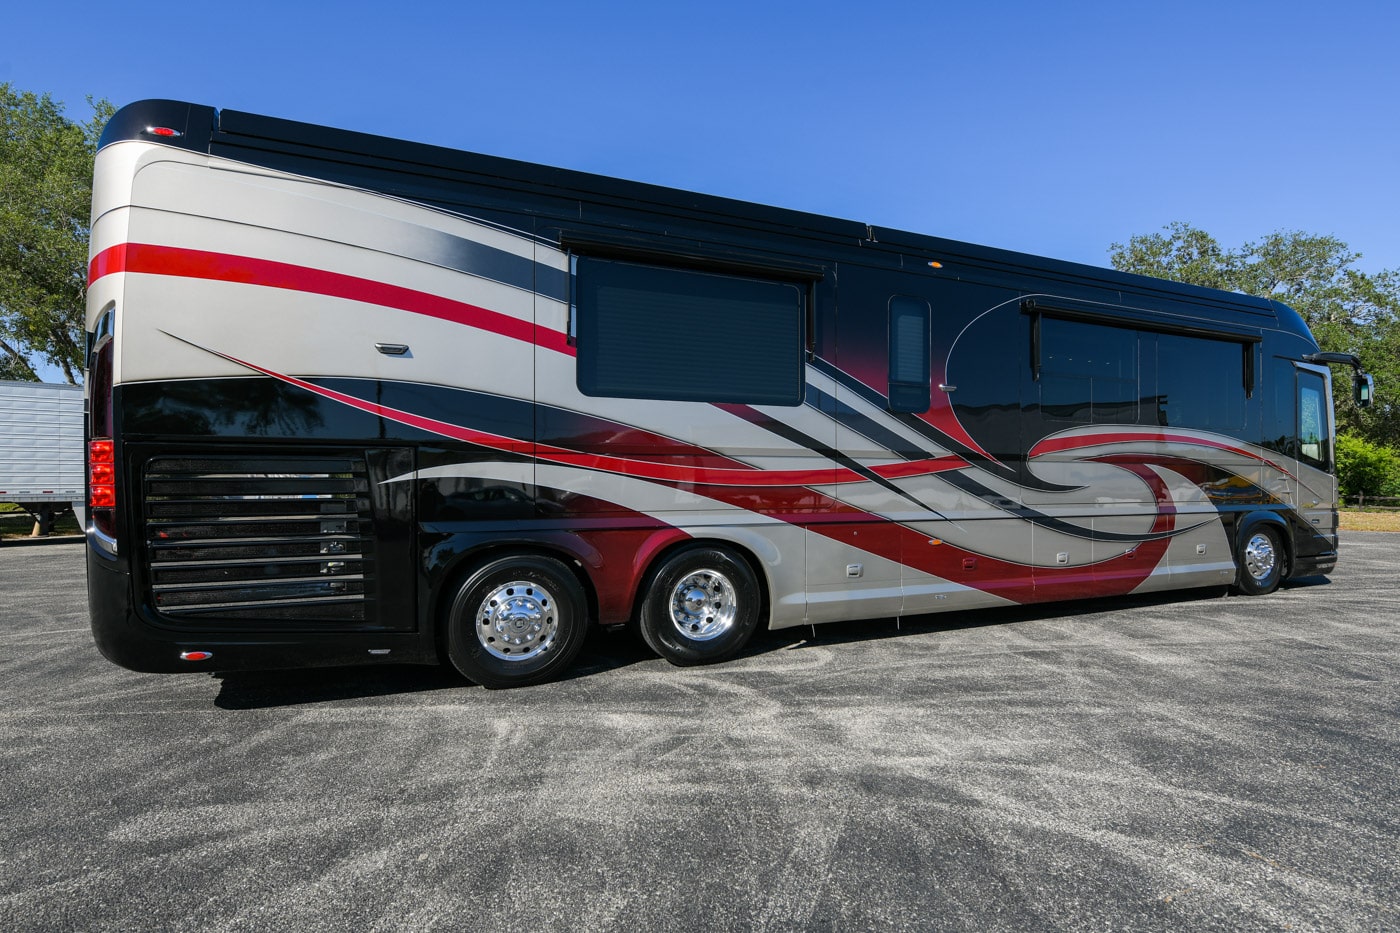 Luxury Preowned Motorcoaches and RVs: The Motorcoach Store